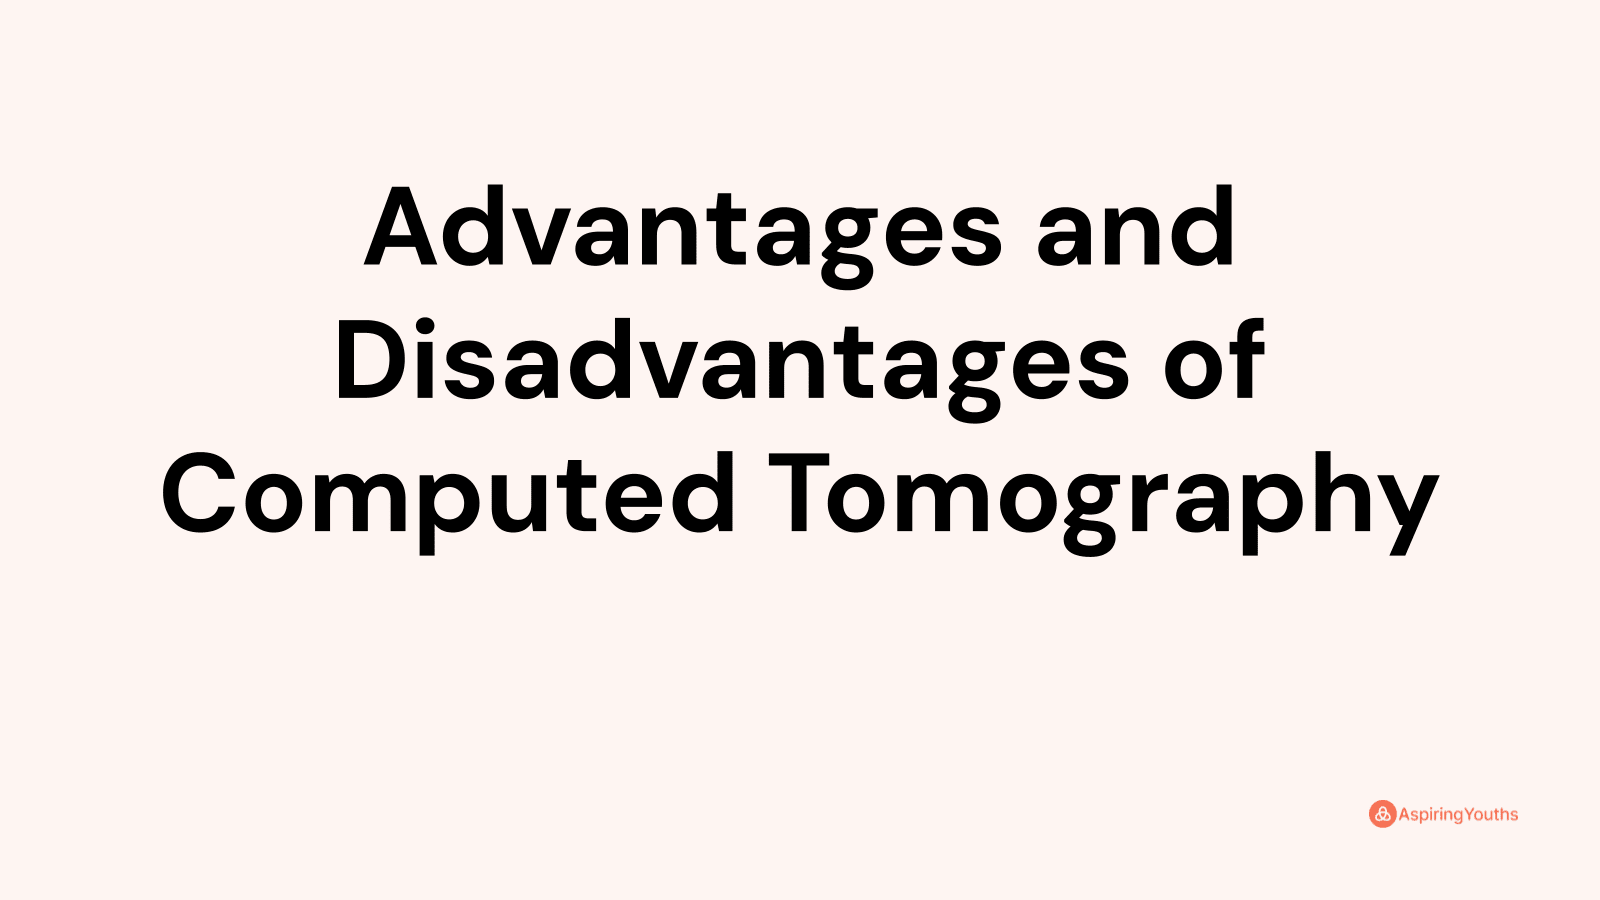 Advantages and disadvantages of Computed Tomography